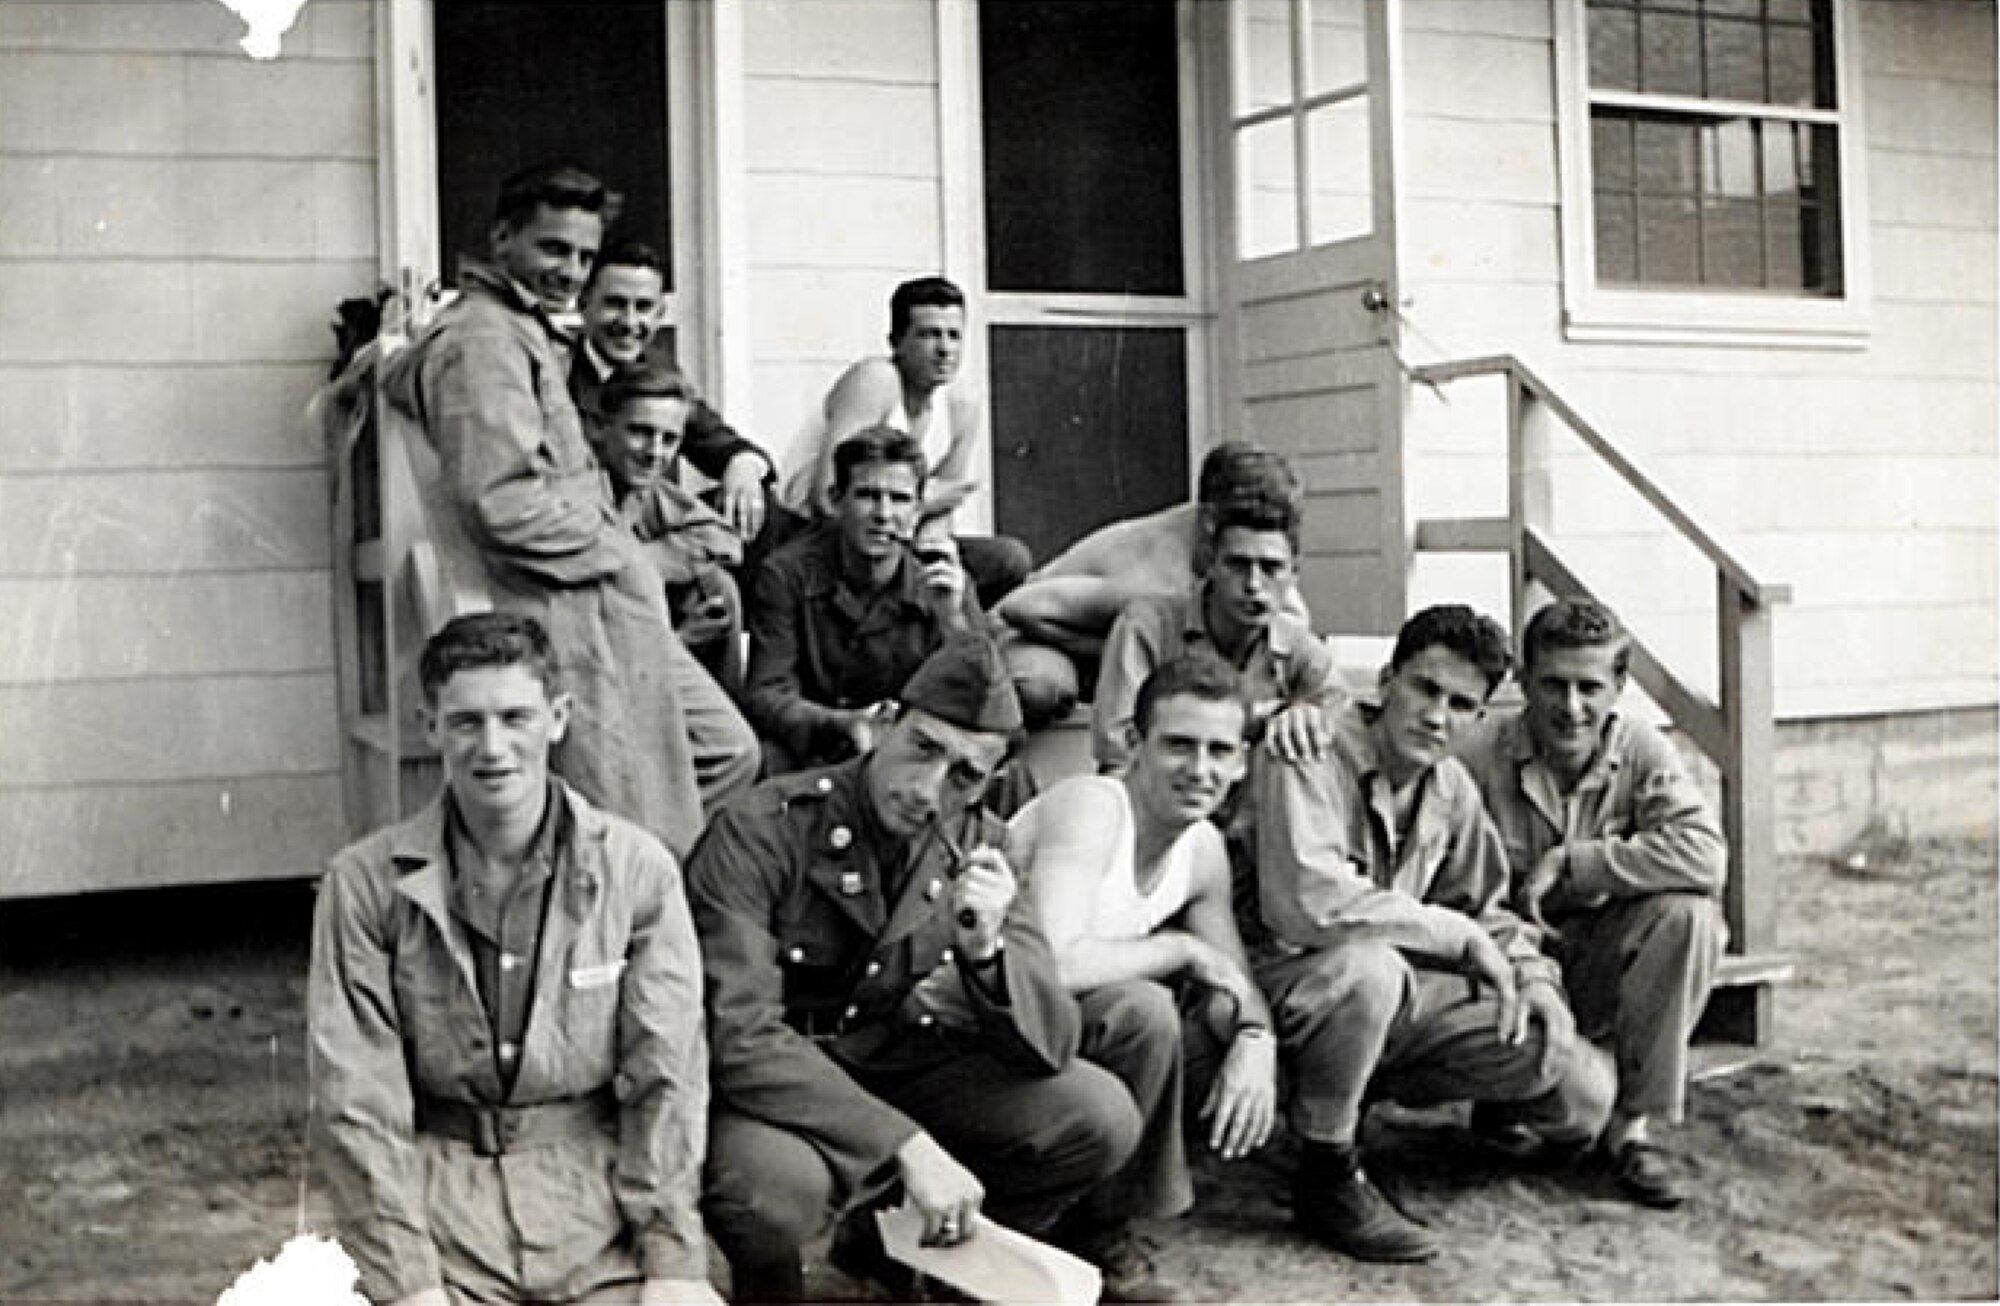 Aircraft mechanic students relax outside one of the dormitories in 1941, at Keesler Field, now known as Keesler Air Force Base, Miss. The dormitory was located south of where the present-day service station and shoppette are located.  Ninety-year-old Thomas Adams Jr., a member of the first class of aircraft mechanic students at Keesler in 1941, made a visit to the base Dec. 7, 2011, on the 70th anniversary of the Japanese attack on Pearl Harbor.  Adams has made his home in Pass Christian, Miss., since 1966 when he retired with 25 years of service in the Army Air Corps which was later name Air Force.  (Courtesy photo)